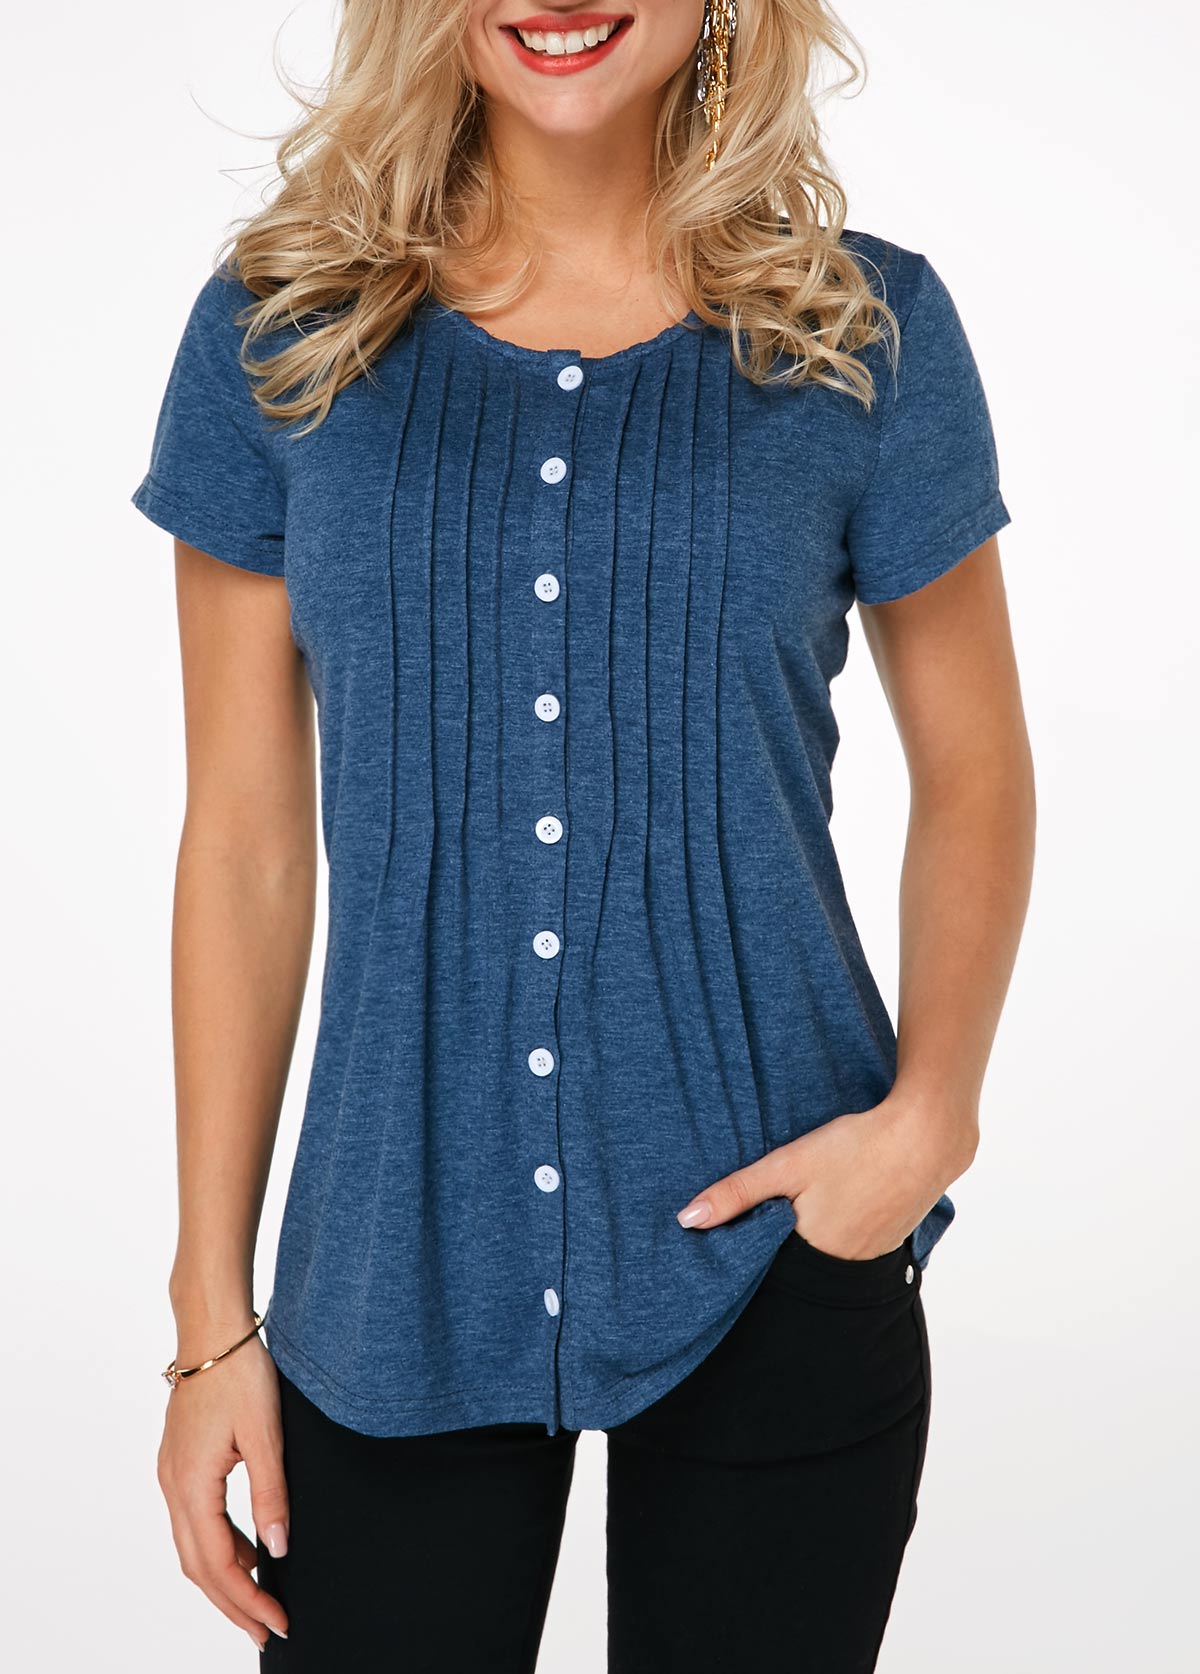 ROTITA Crinkle Chest Button Up Navy Blue T Shirt